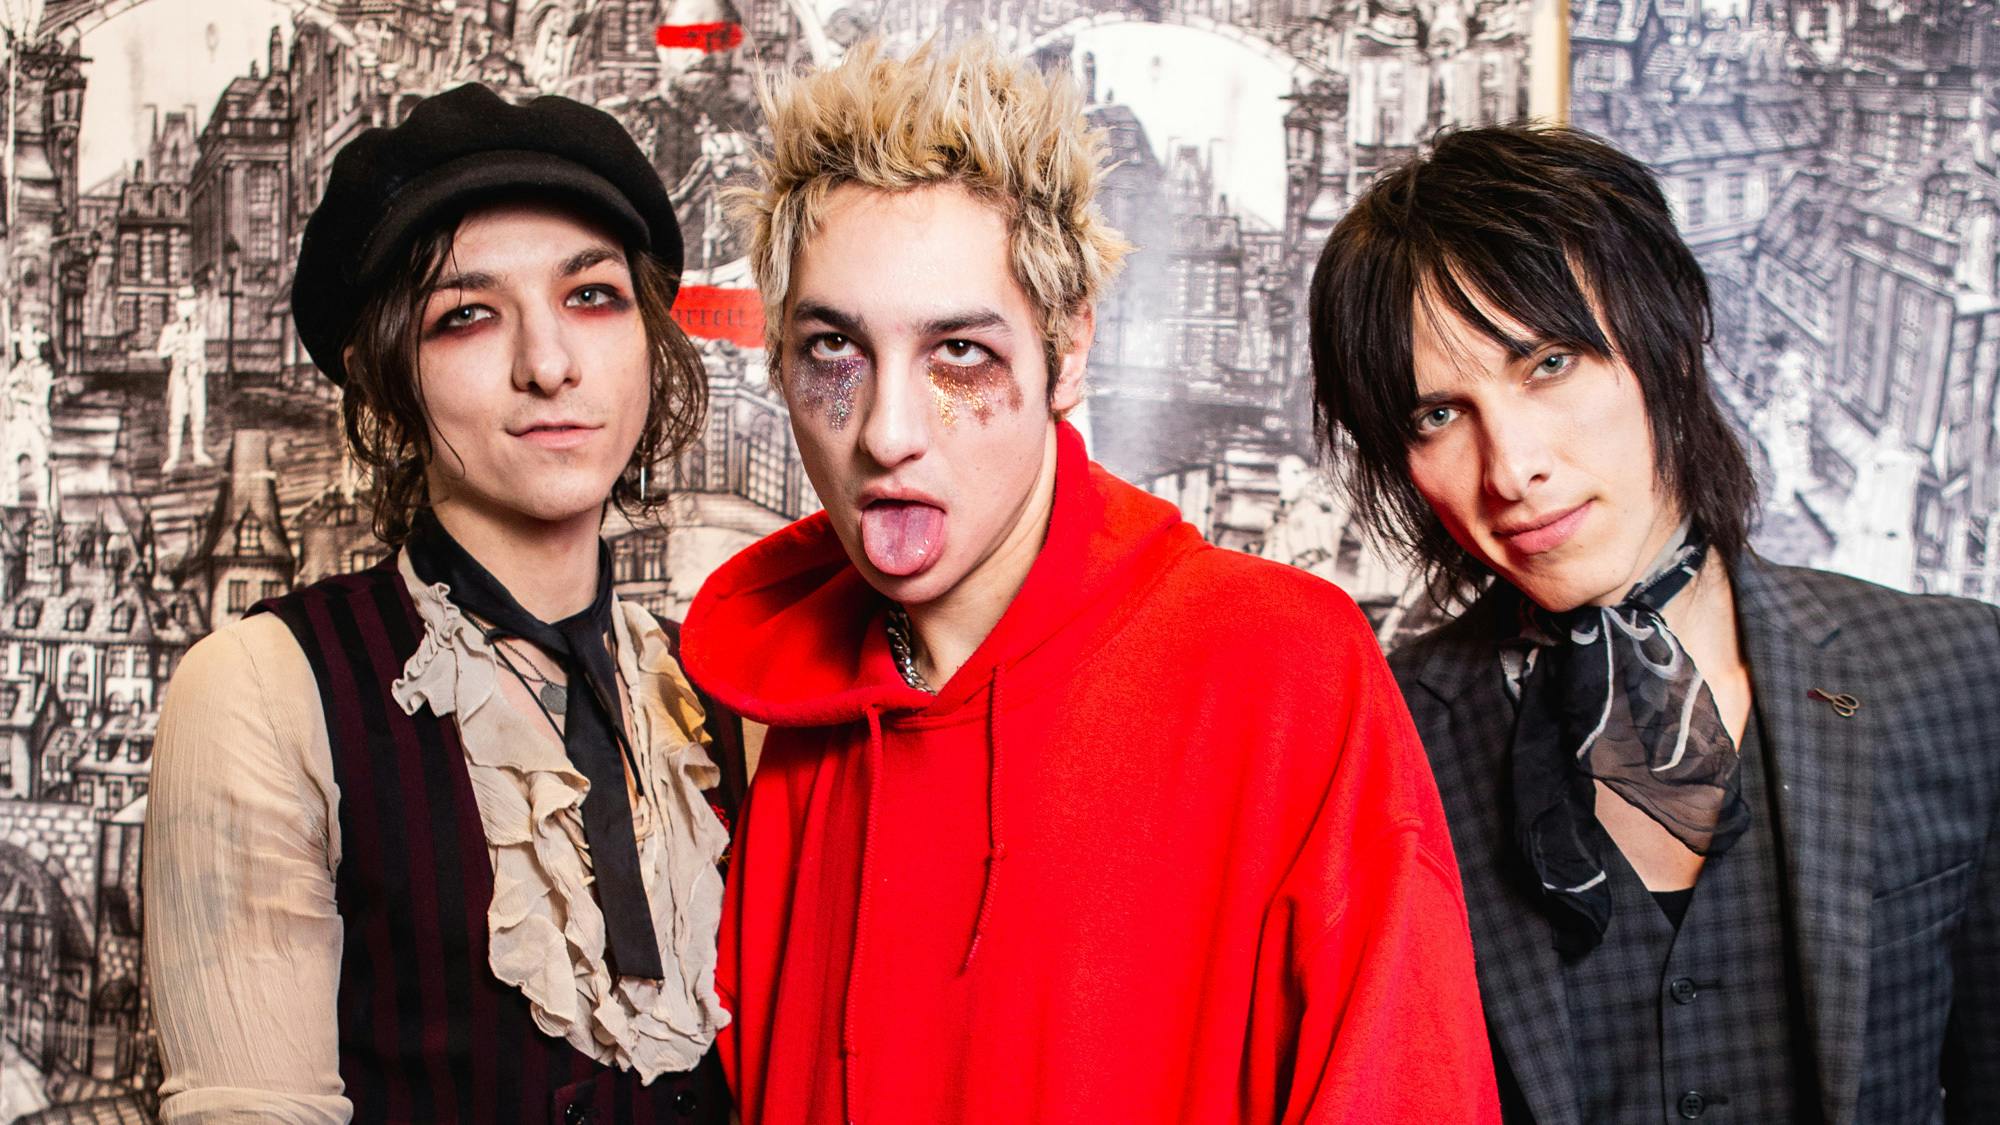 Palaye Royale's Live! Tonight! At Home! As Been Postponed